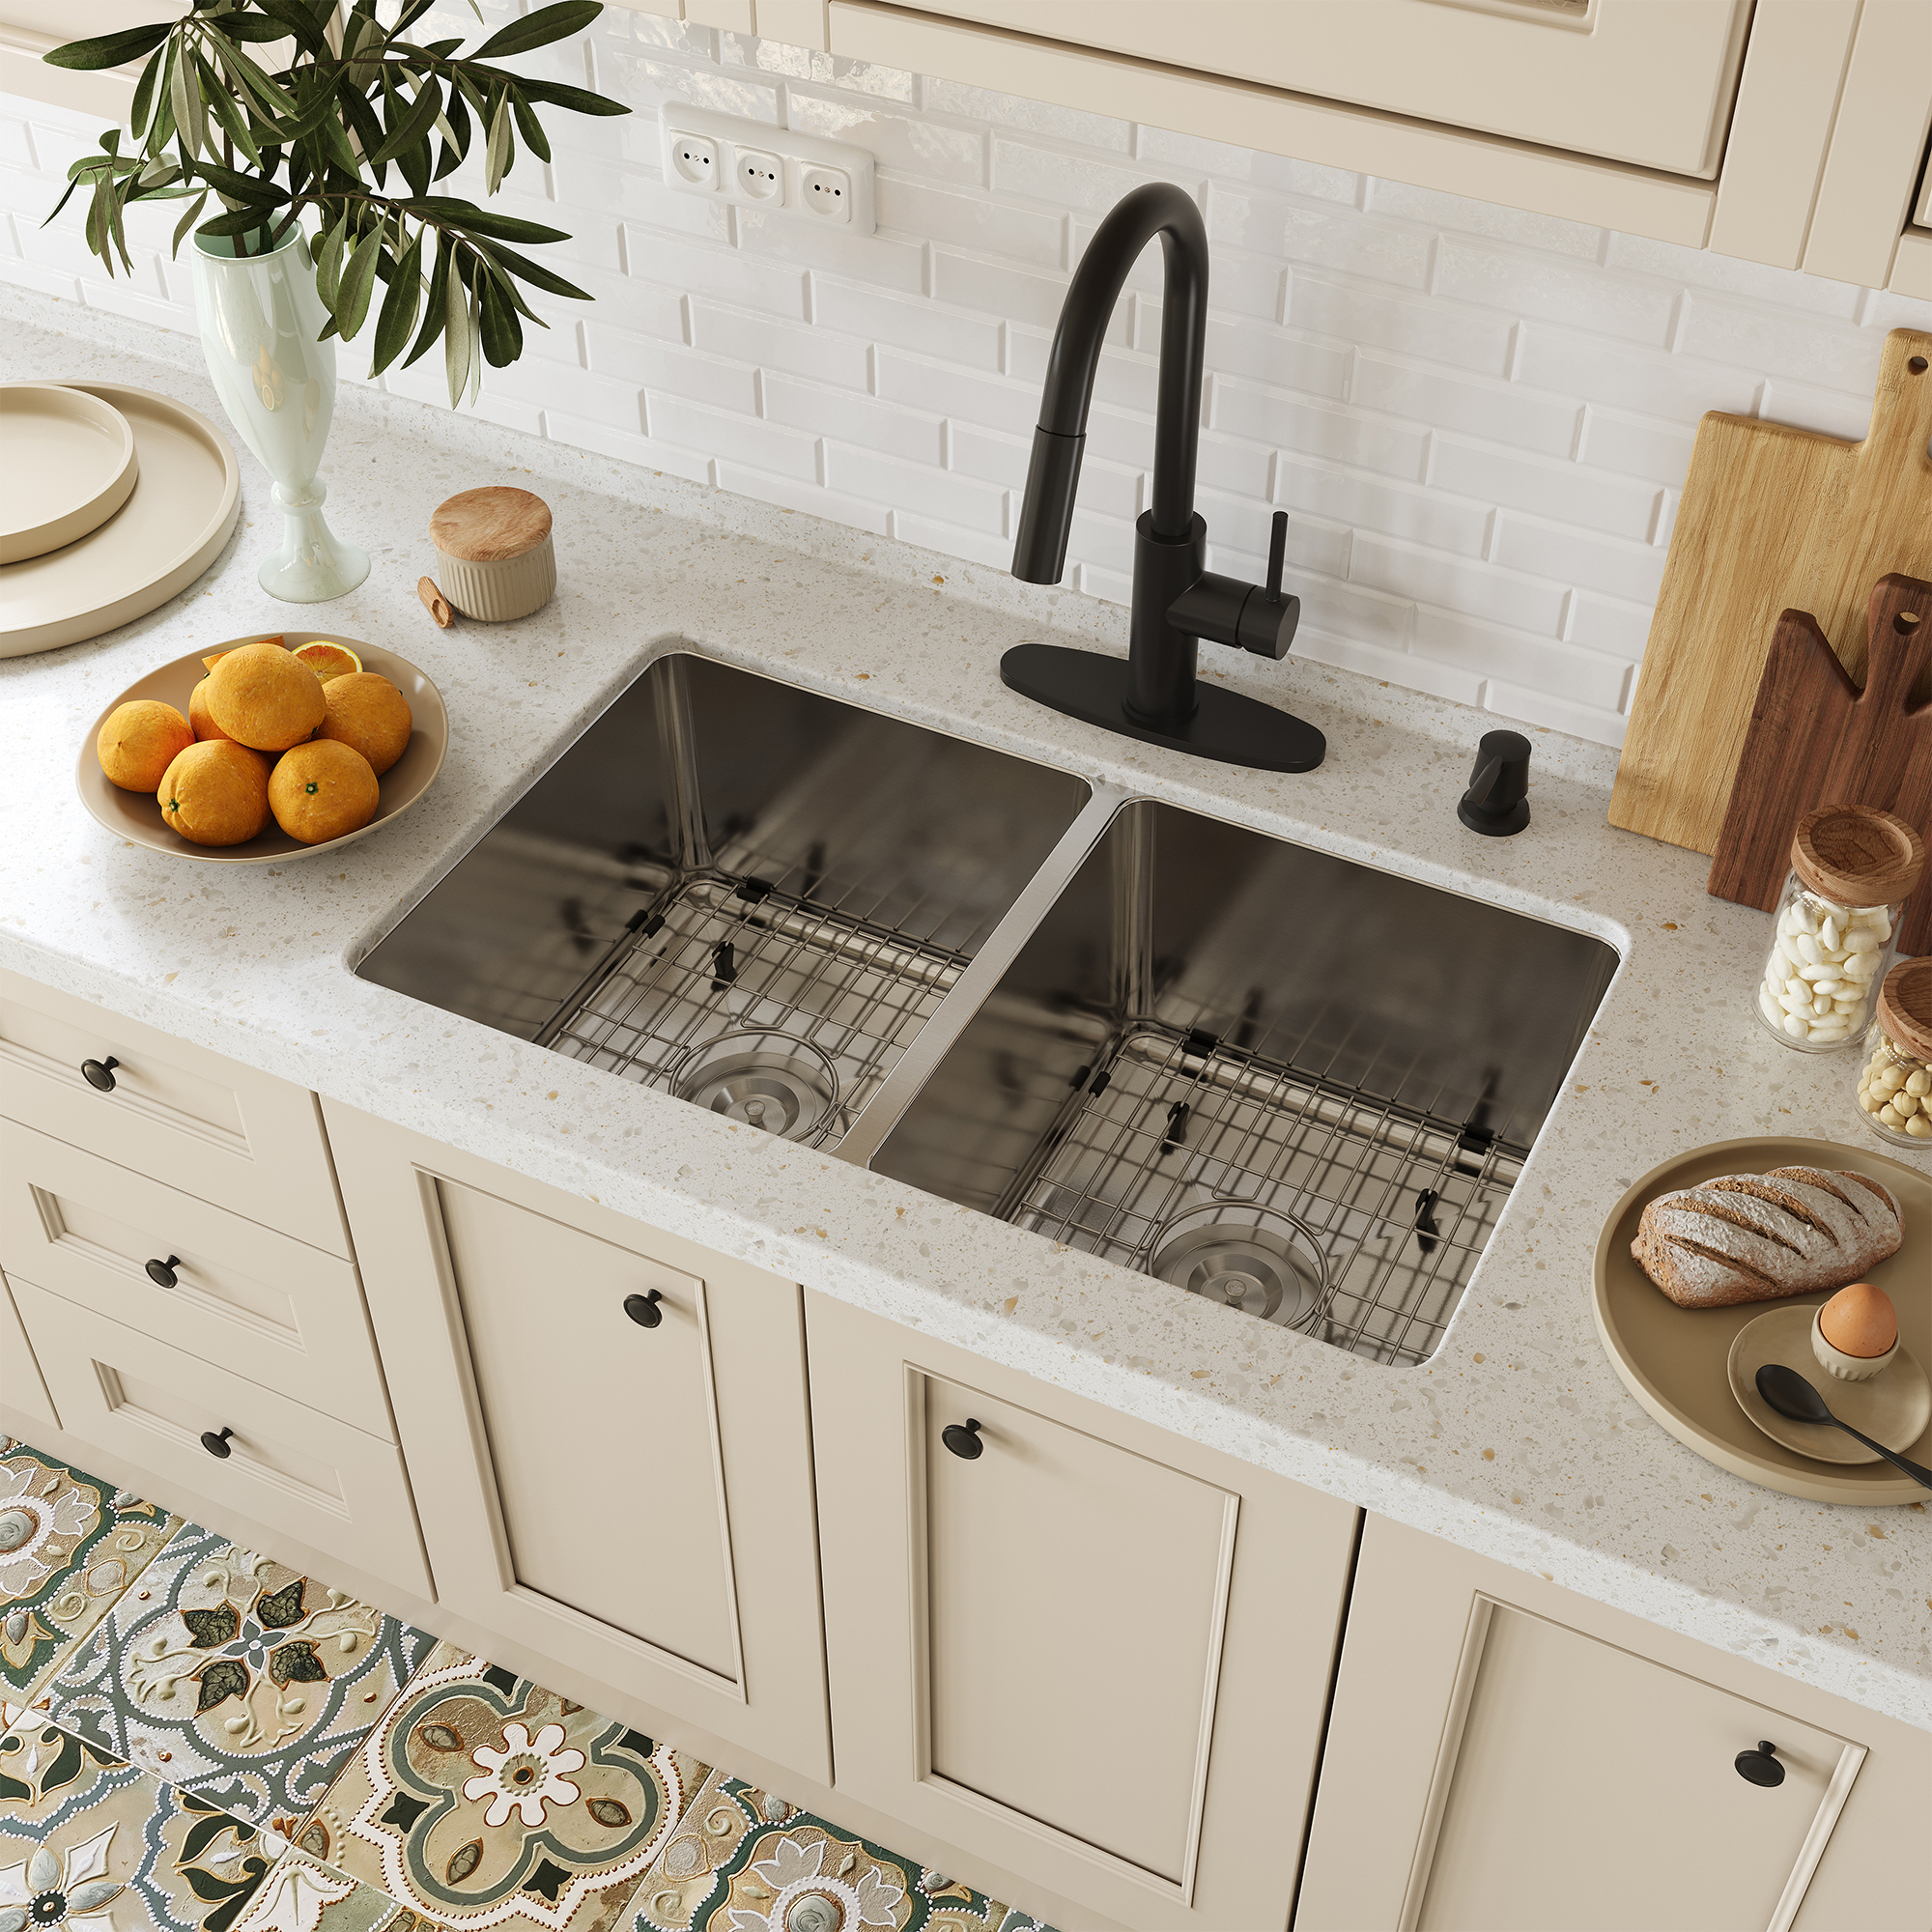 SUS304 Stainless Steel Single Bowl Home Kitchen Sink with a Small